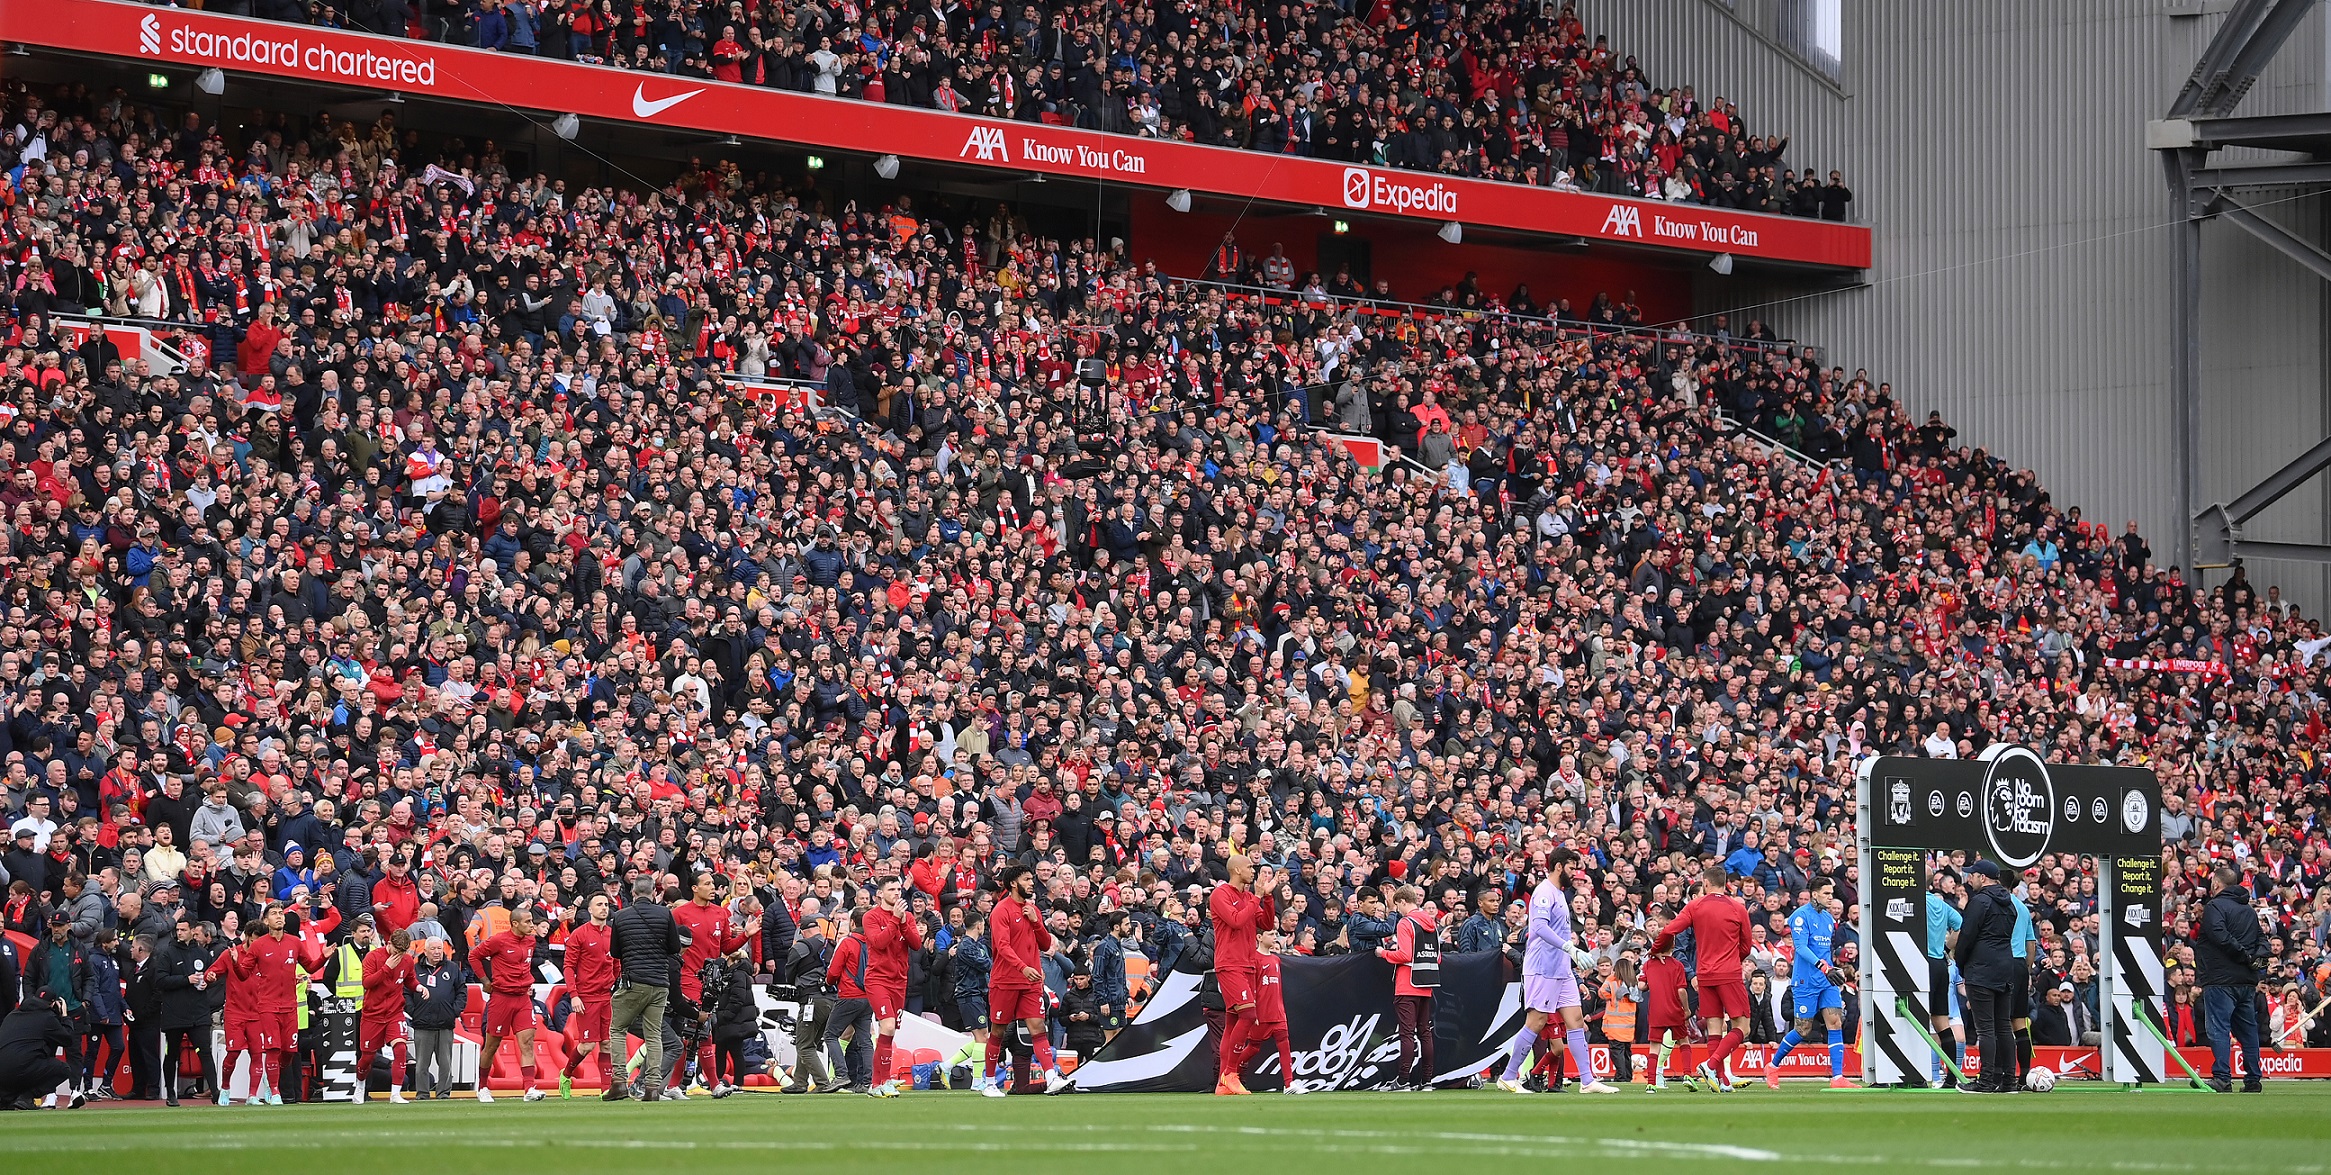 What Liverpool fans chanted back at City visitors after ‘famous atmosphere’ mocking